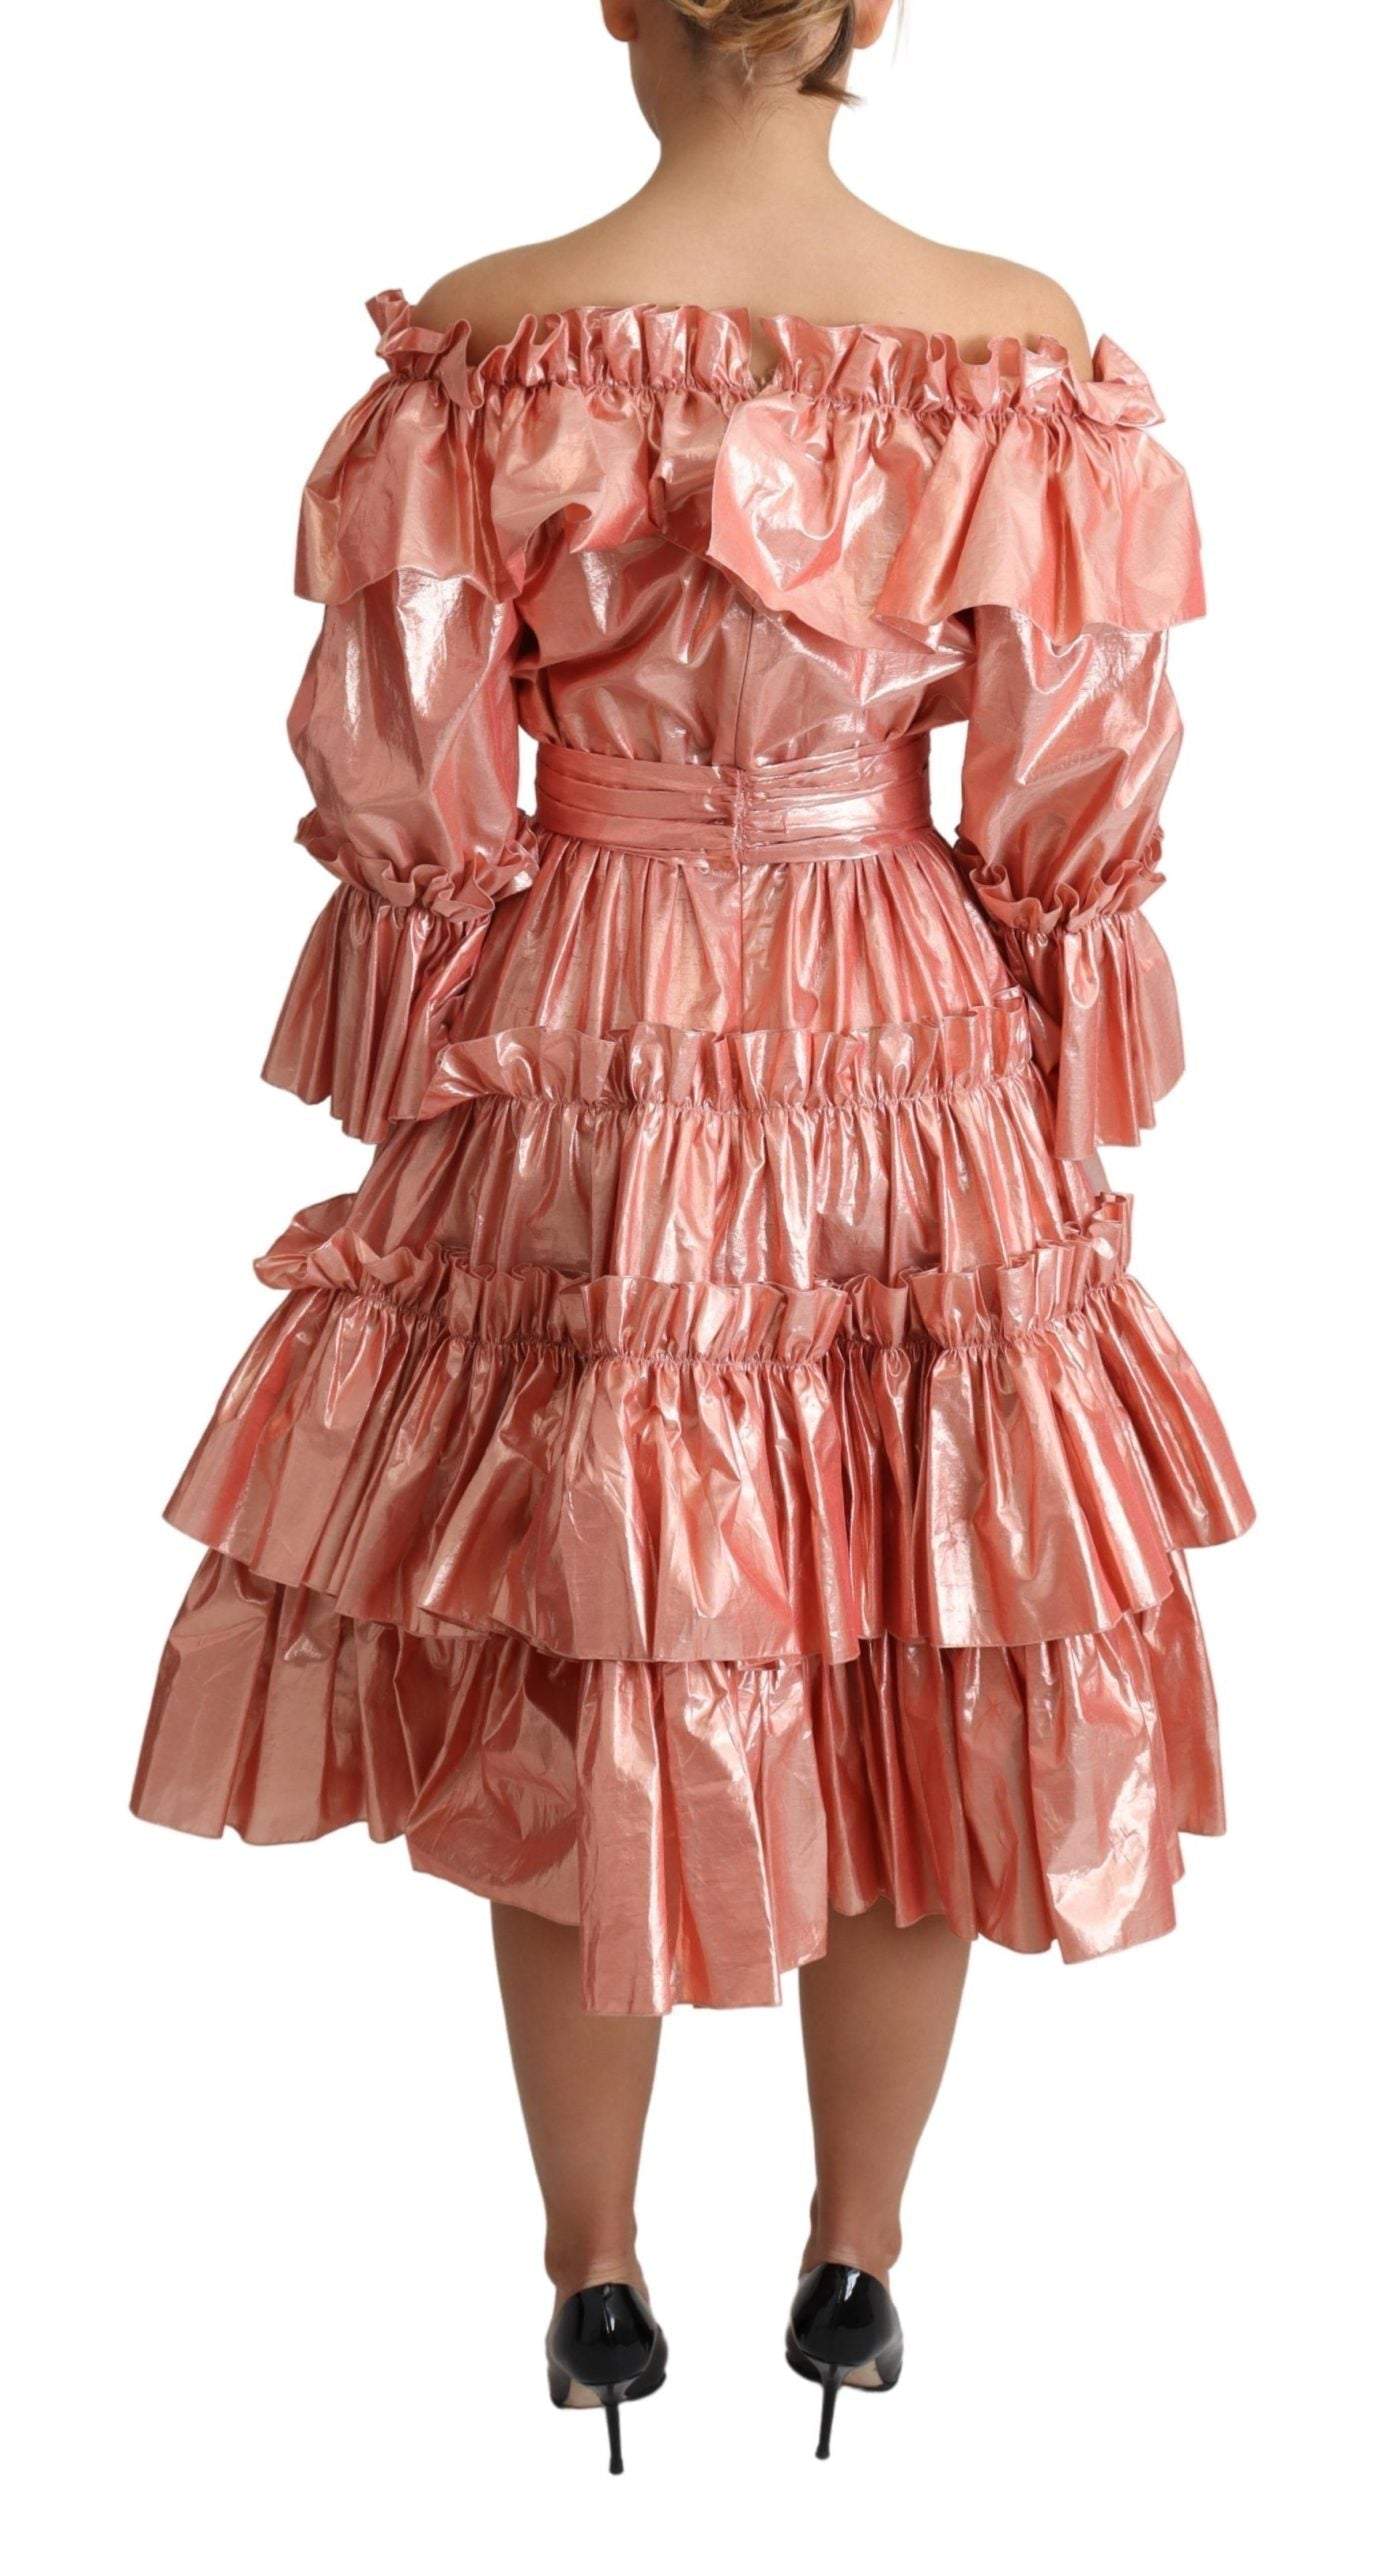 Dolce & Gabbana Pink Ruffled Dress Silk Cotton Gown Dress #women, Dolce & Gabbana, Dresses - Women - Clothing, feed-agegroup-adult, feed-color-Pink, feed-gender-female, IT36|XXS, IT38|XS, Pink, Women - New Arrivals at SEYMAYKA